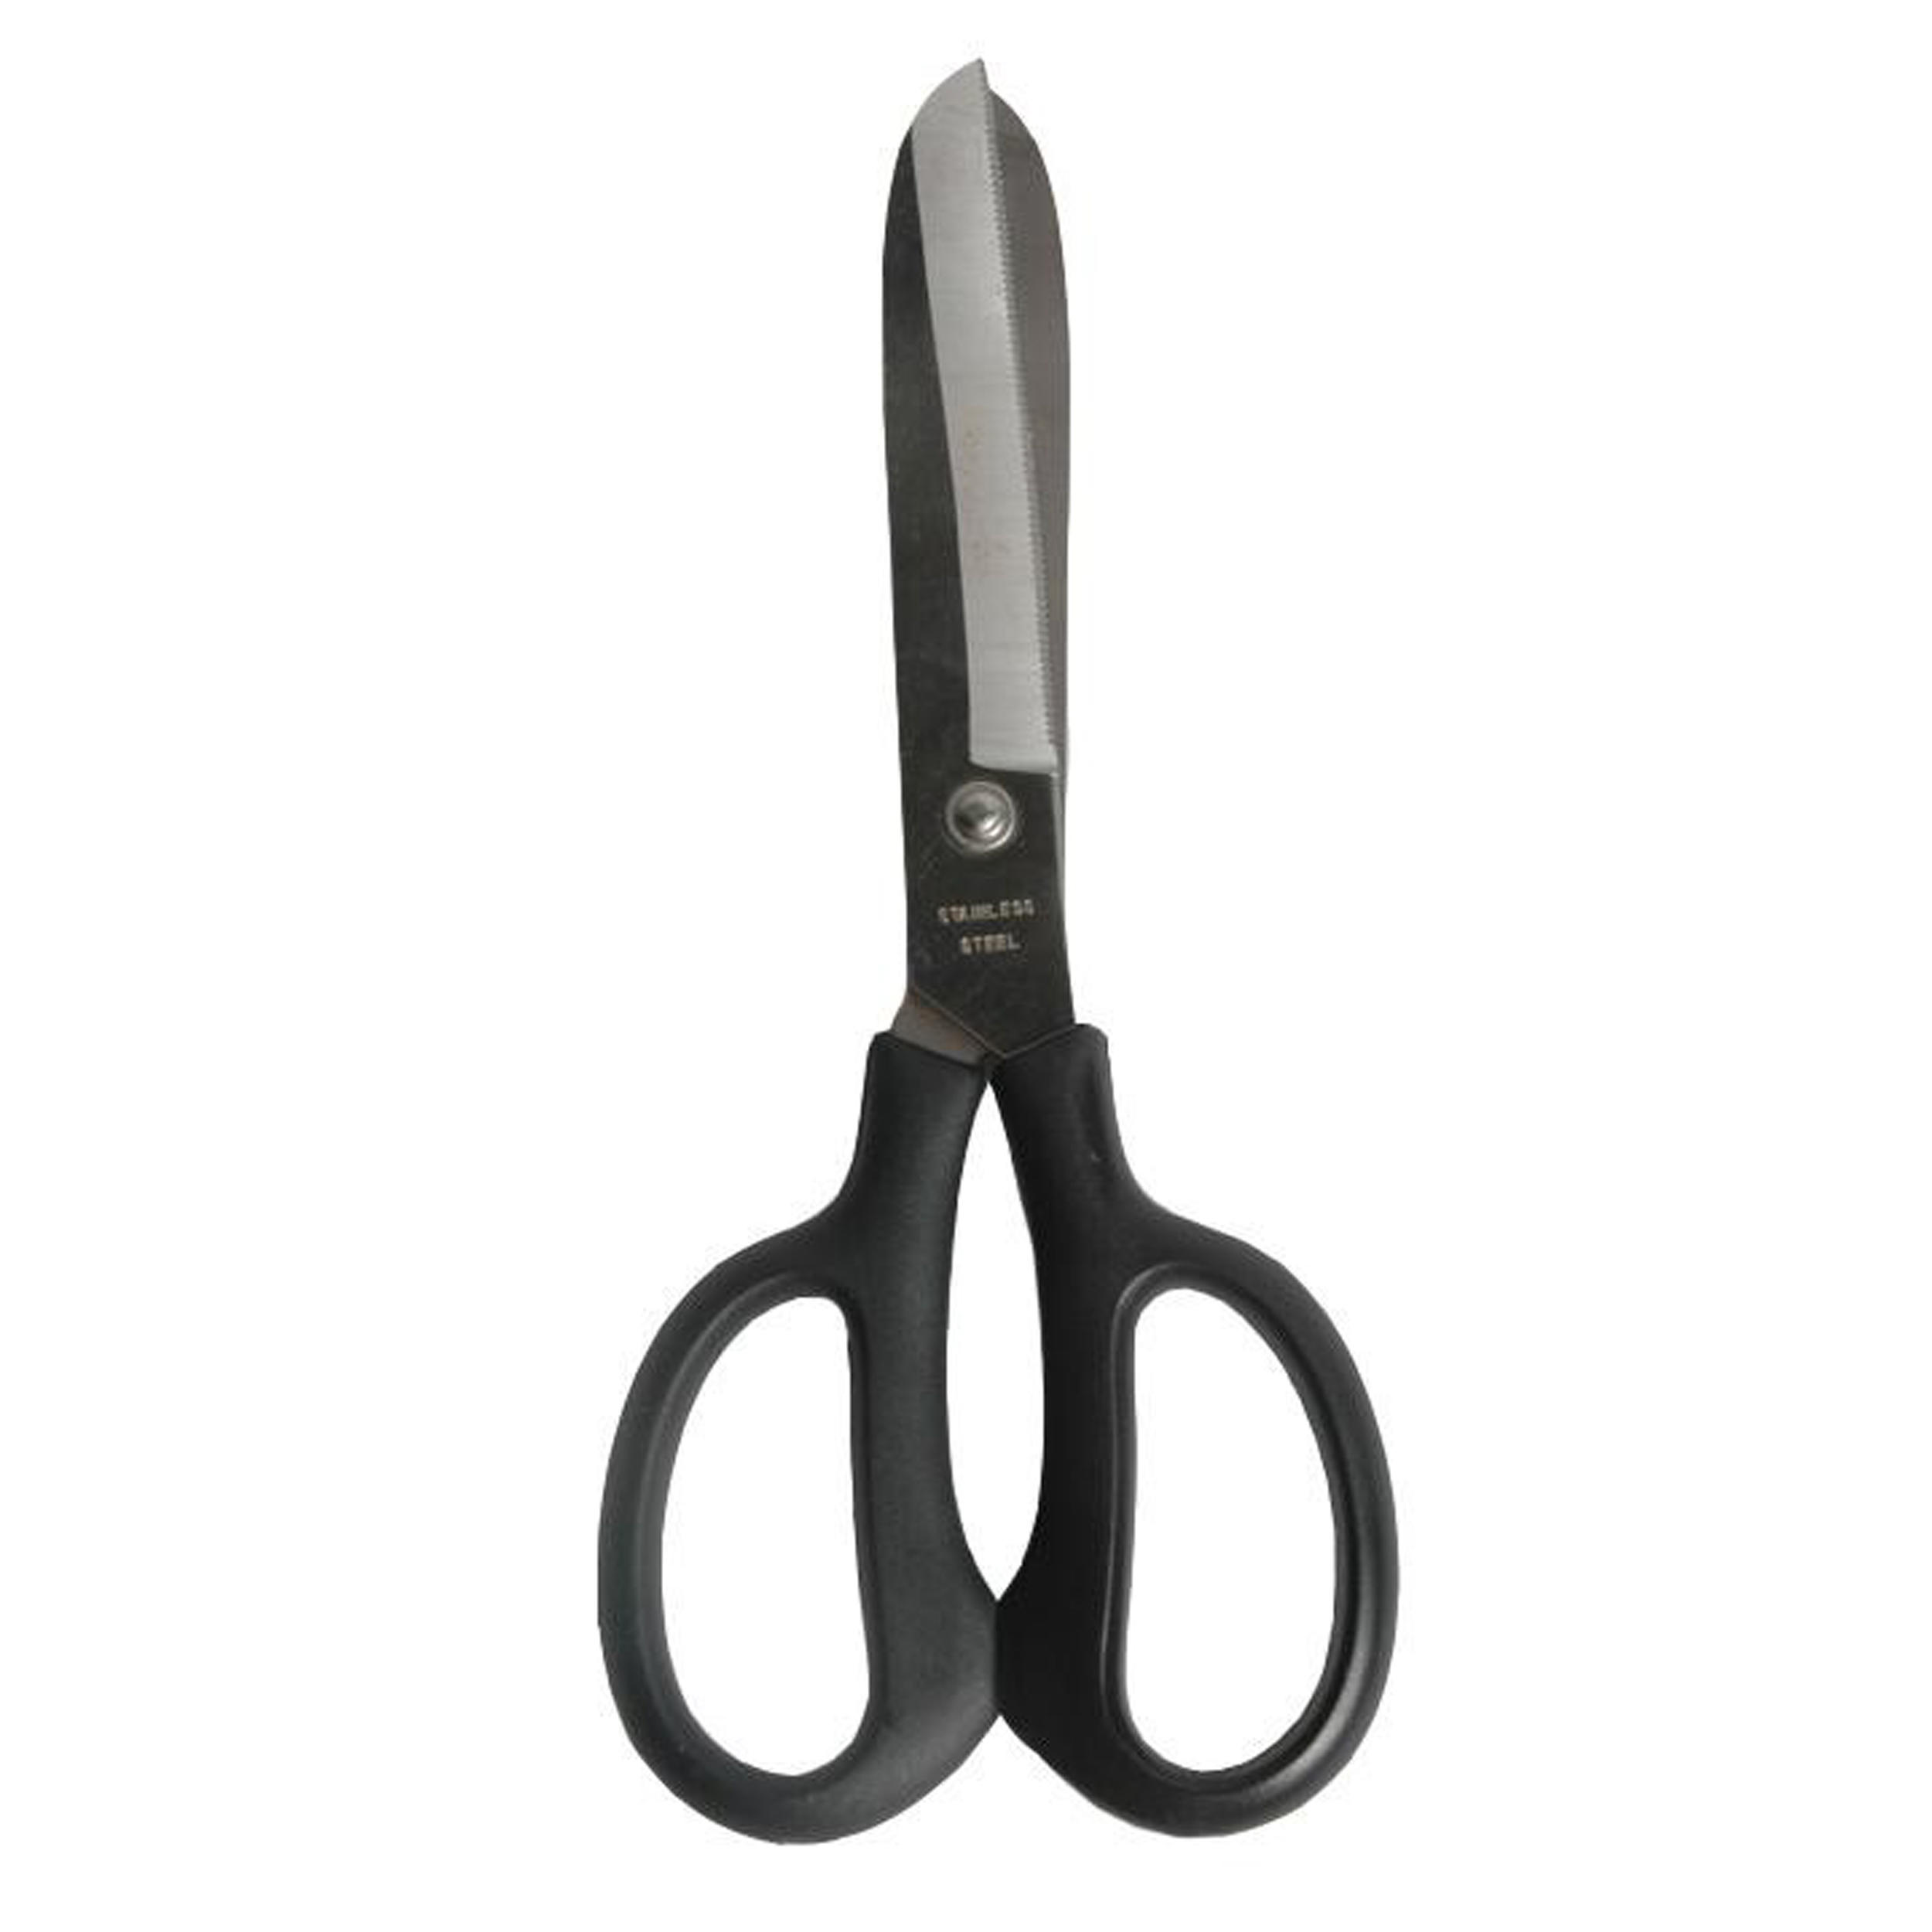 NO BRAND Horse Riding Grooming Scissors for Horse and Pony